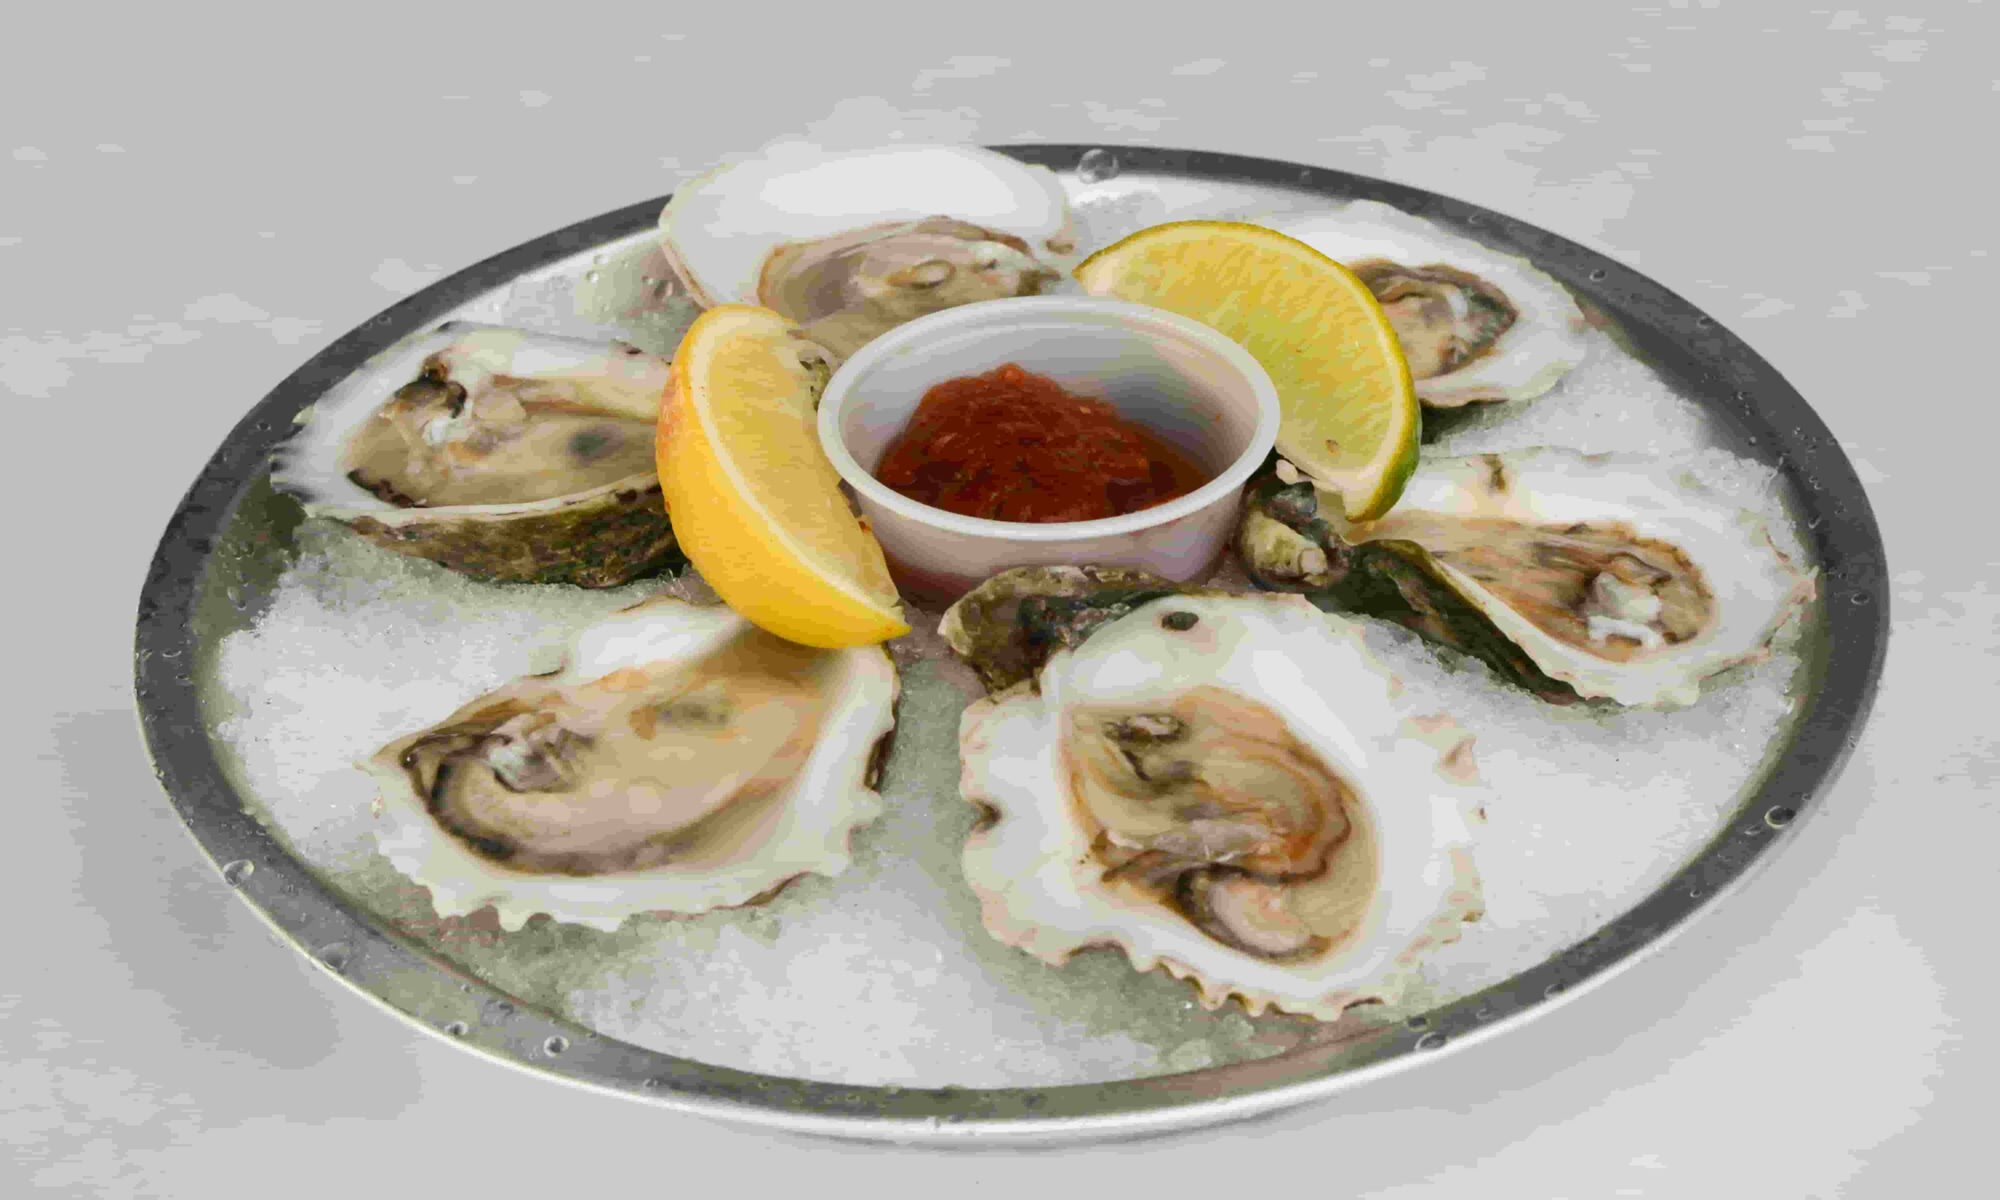 Oysters on ice served with Lemon and sauce